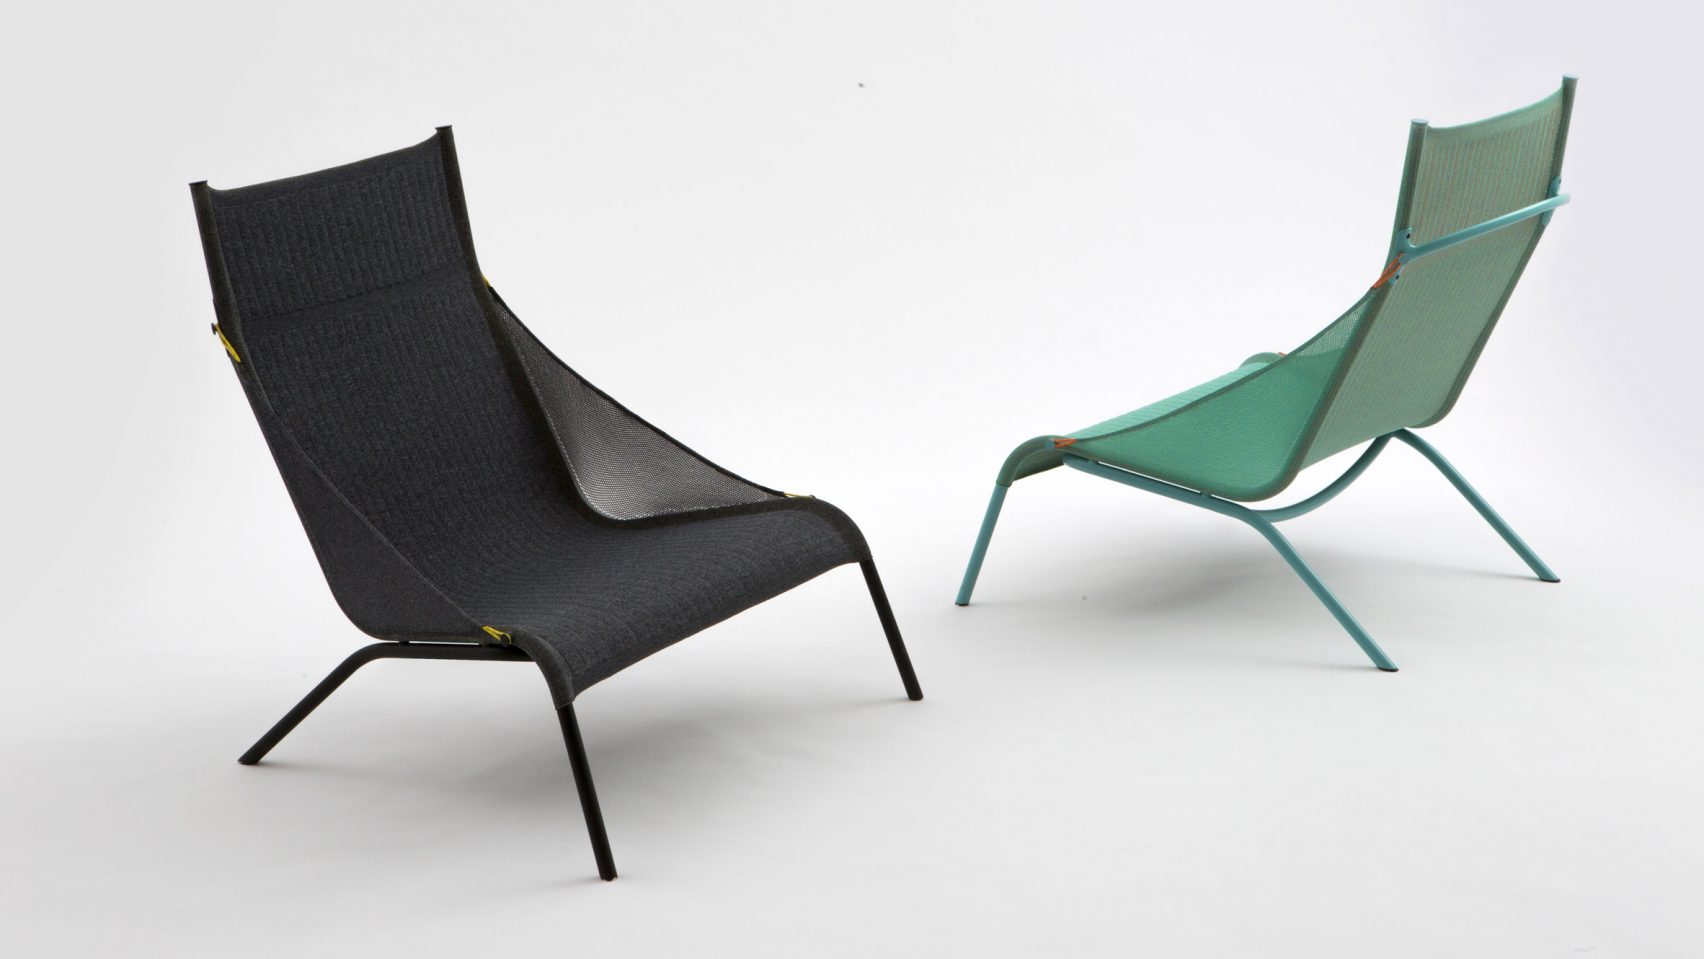 Benjamin Hubert S Tent Chair For Moroso Is Made From Knitted Nylon